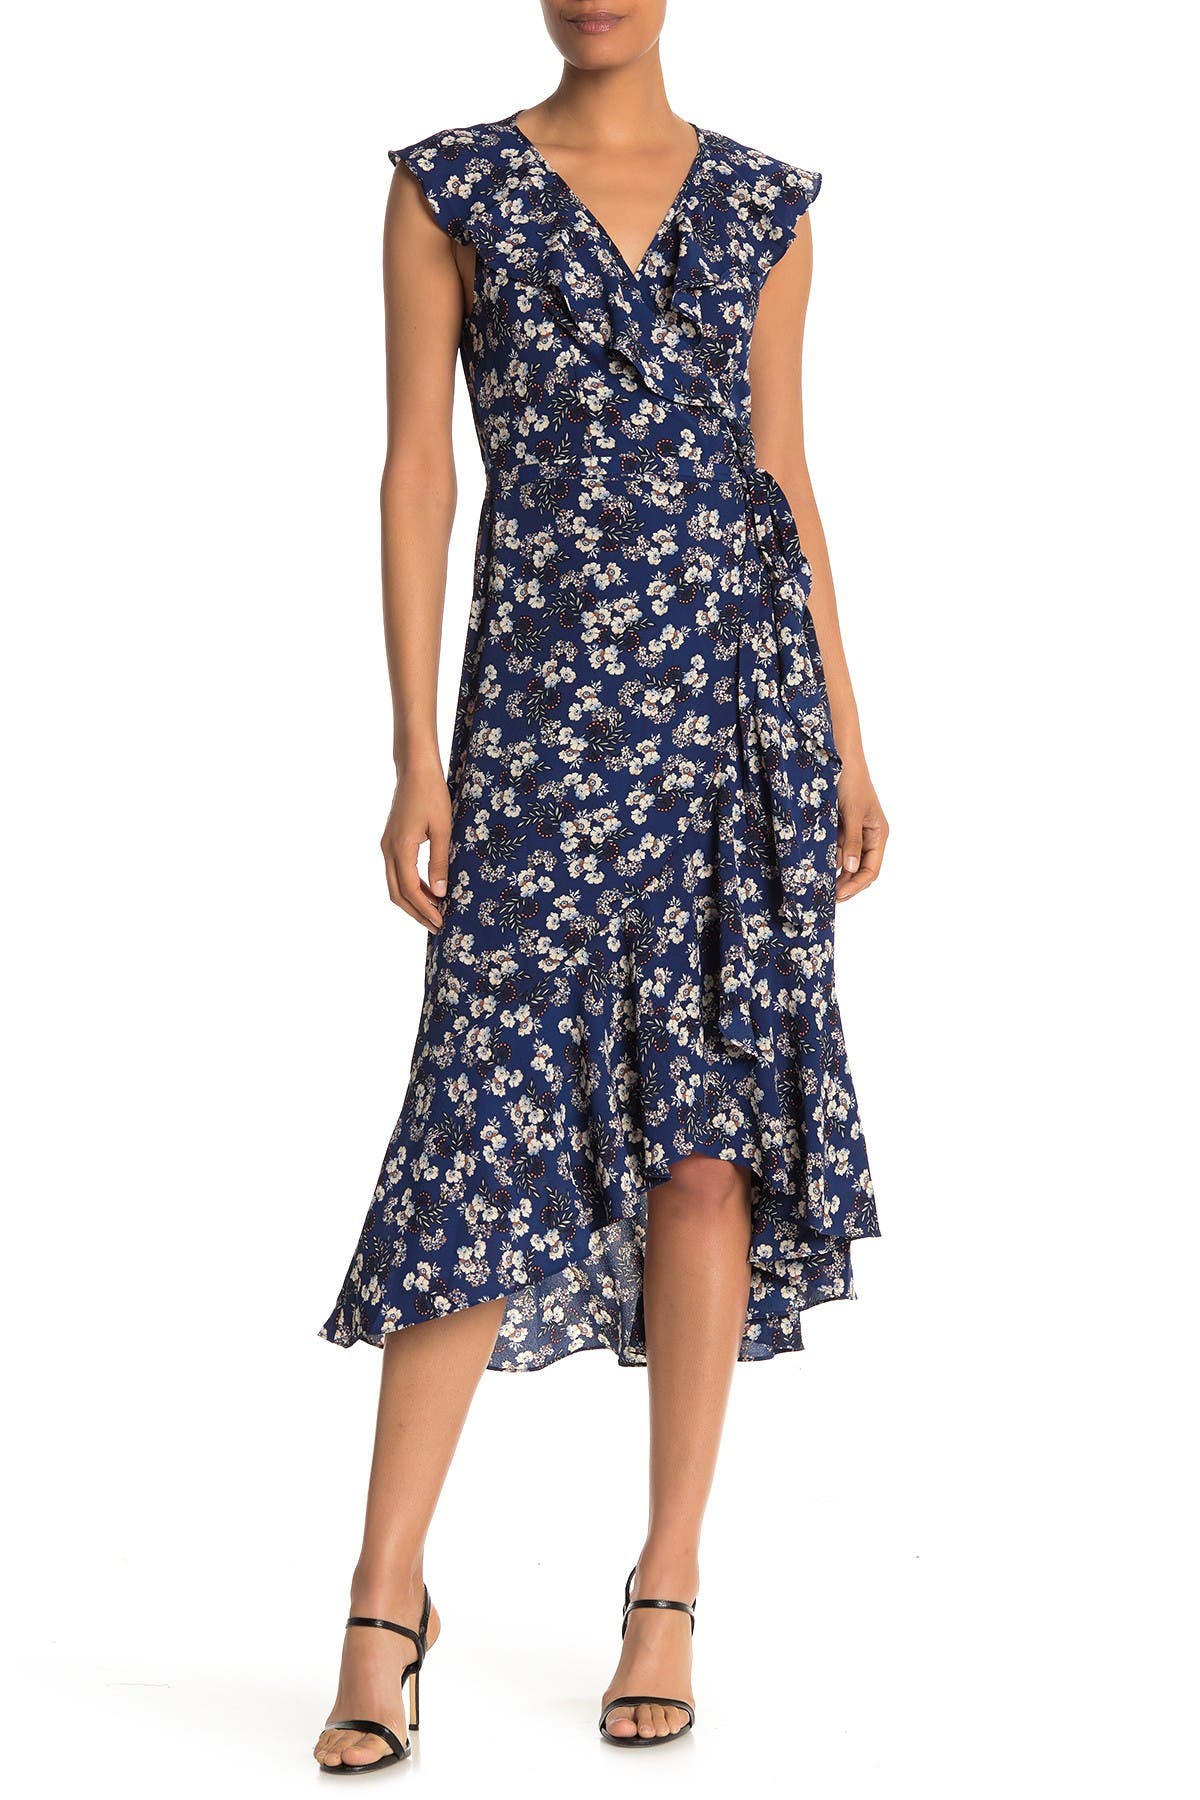 Max Studio Patterned Ruffle Wrap Midi Dress In Navy/coral Floral Berry